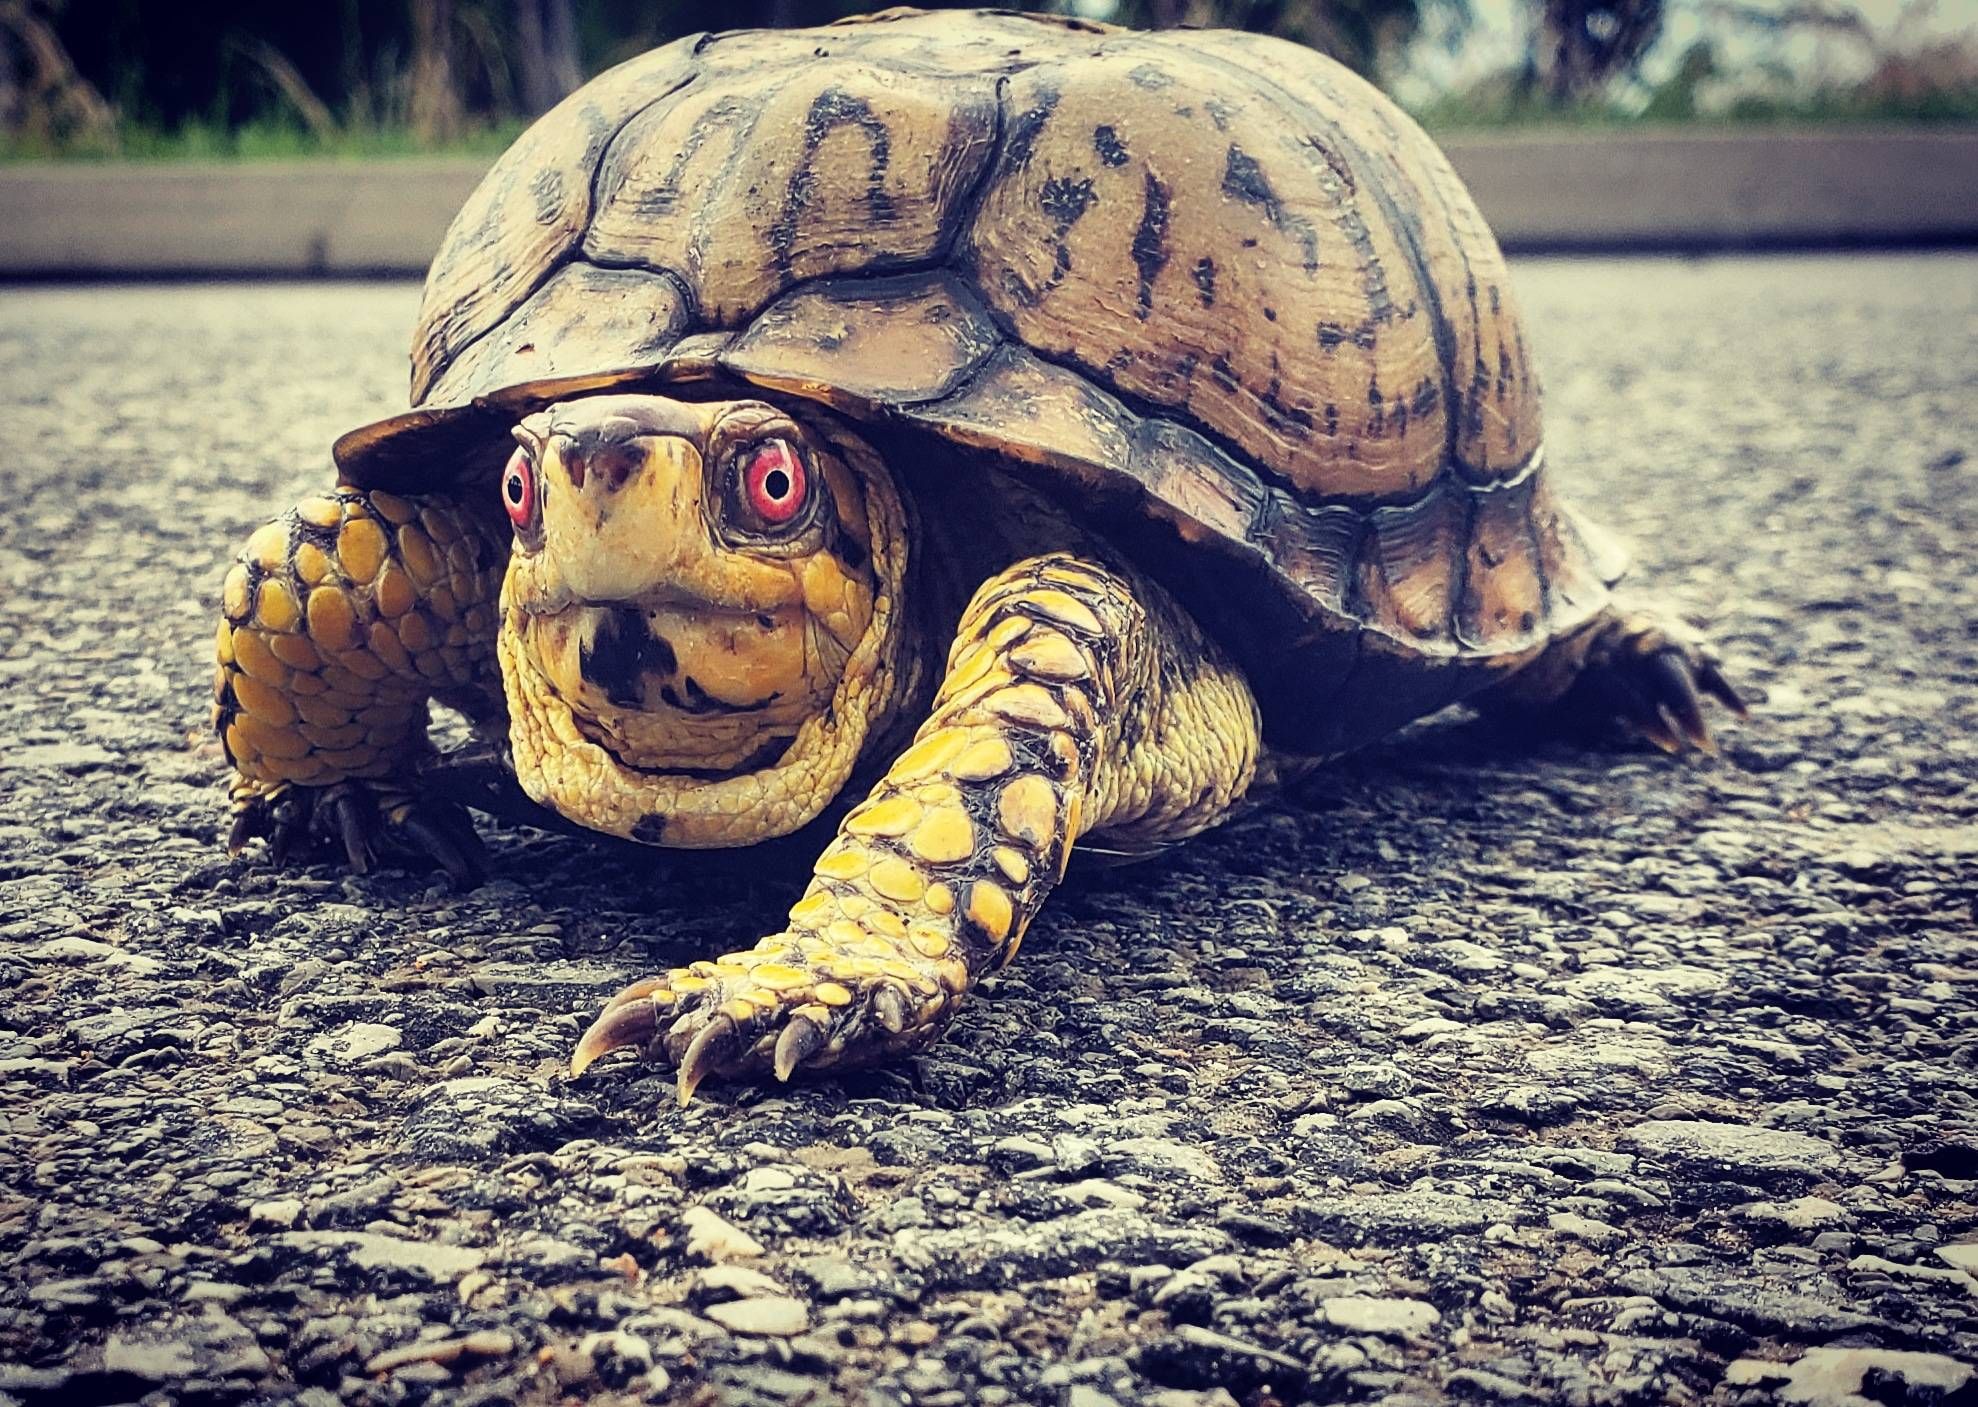 I saved this turtle out of the road. He tried to thank me by selling me meth.